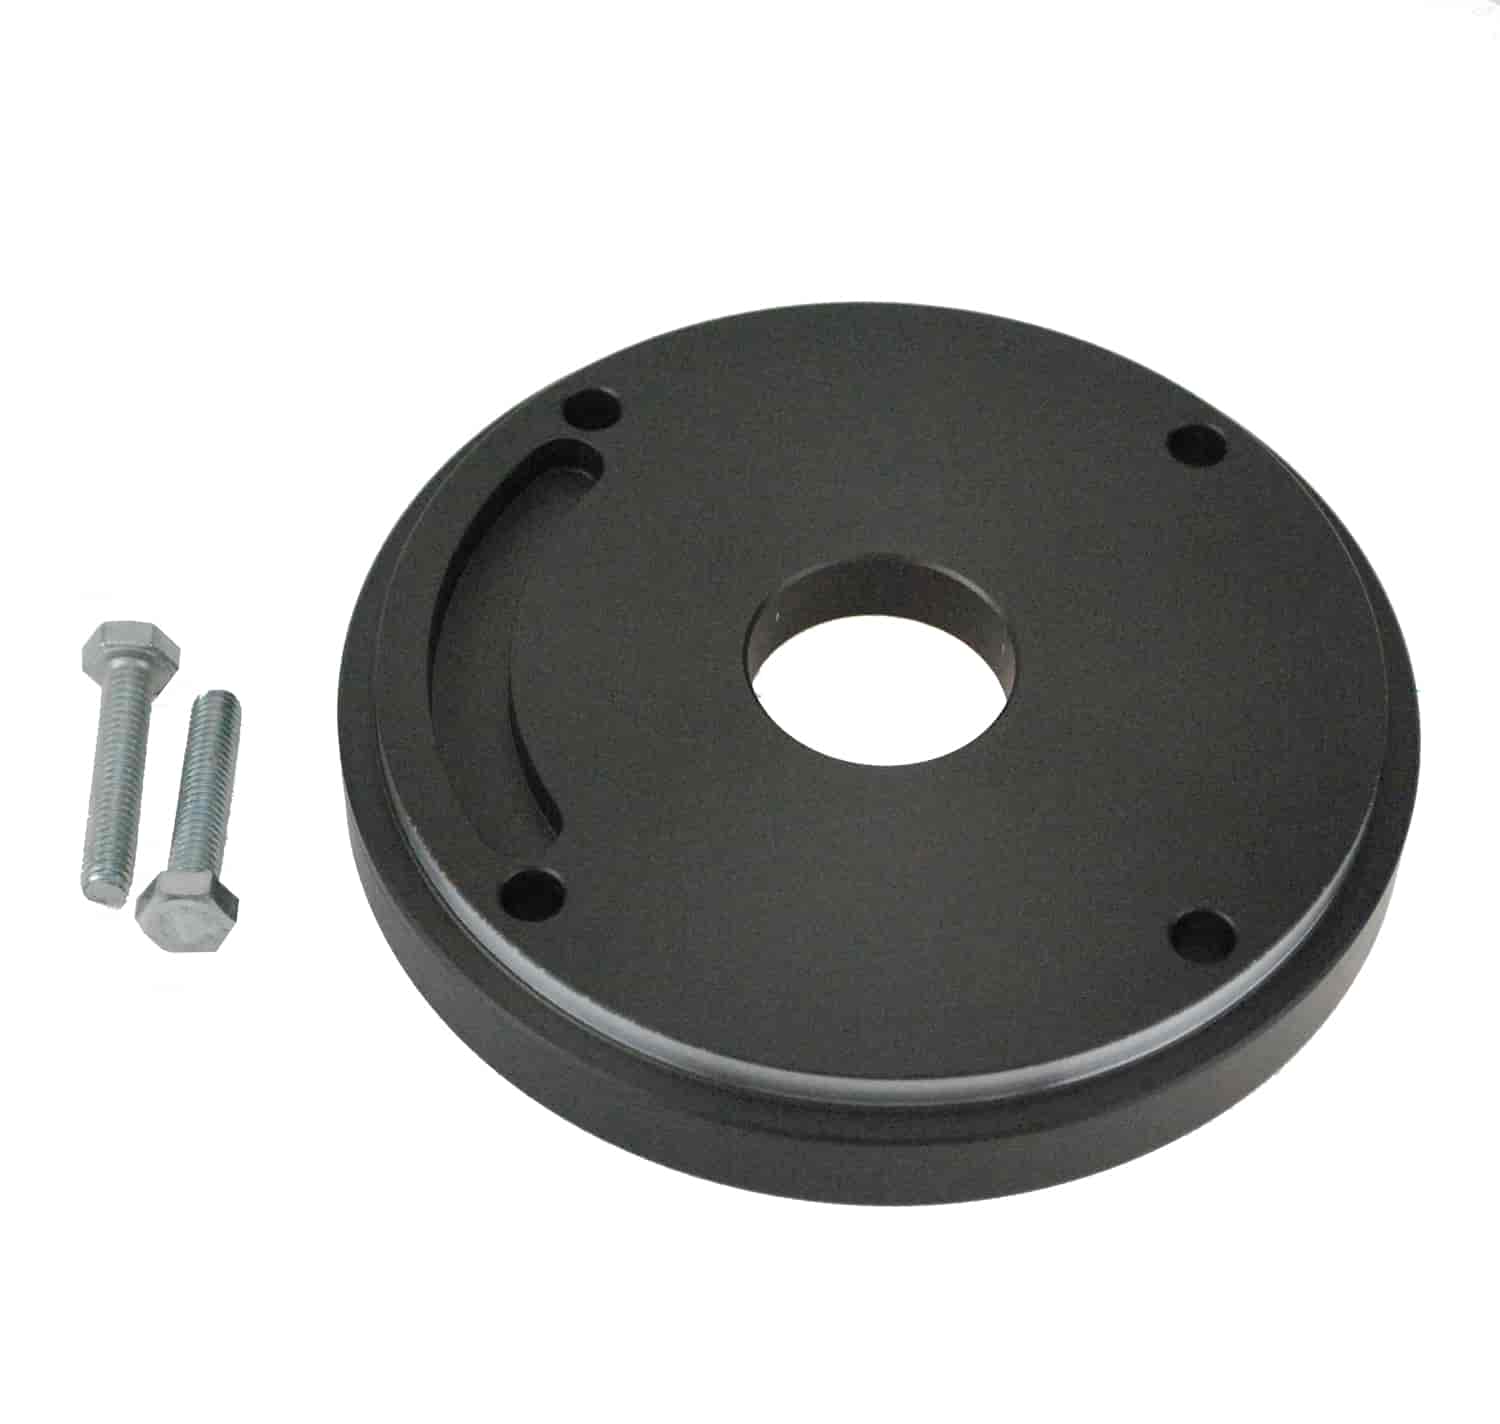 Hydraulic Bearing Aluminum Spacer .500" Thick for T56/6060 Collar-Off Transmissions